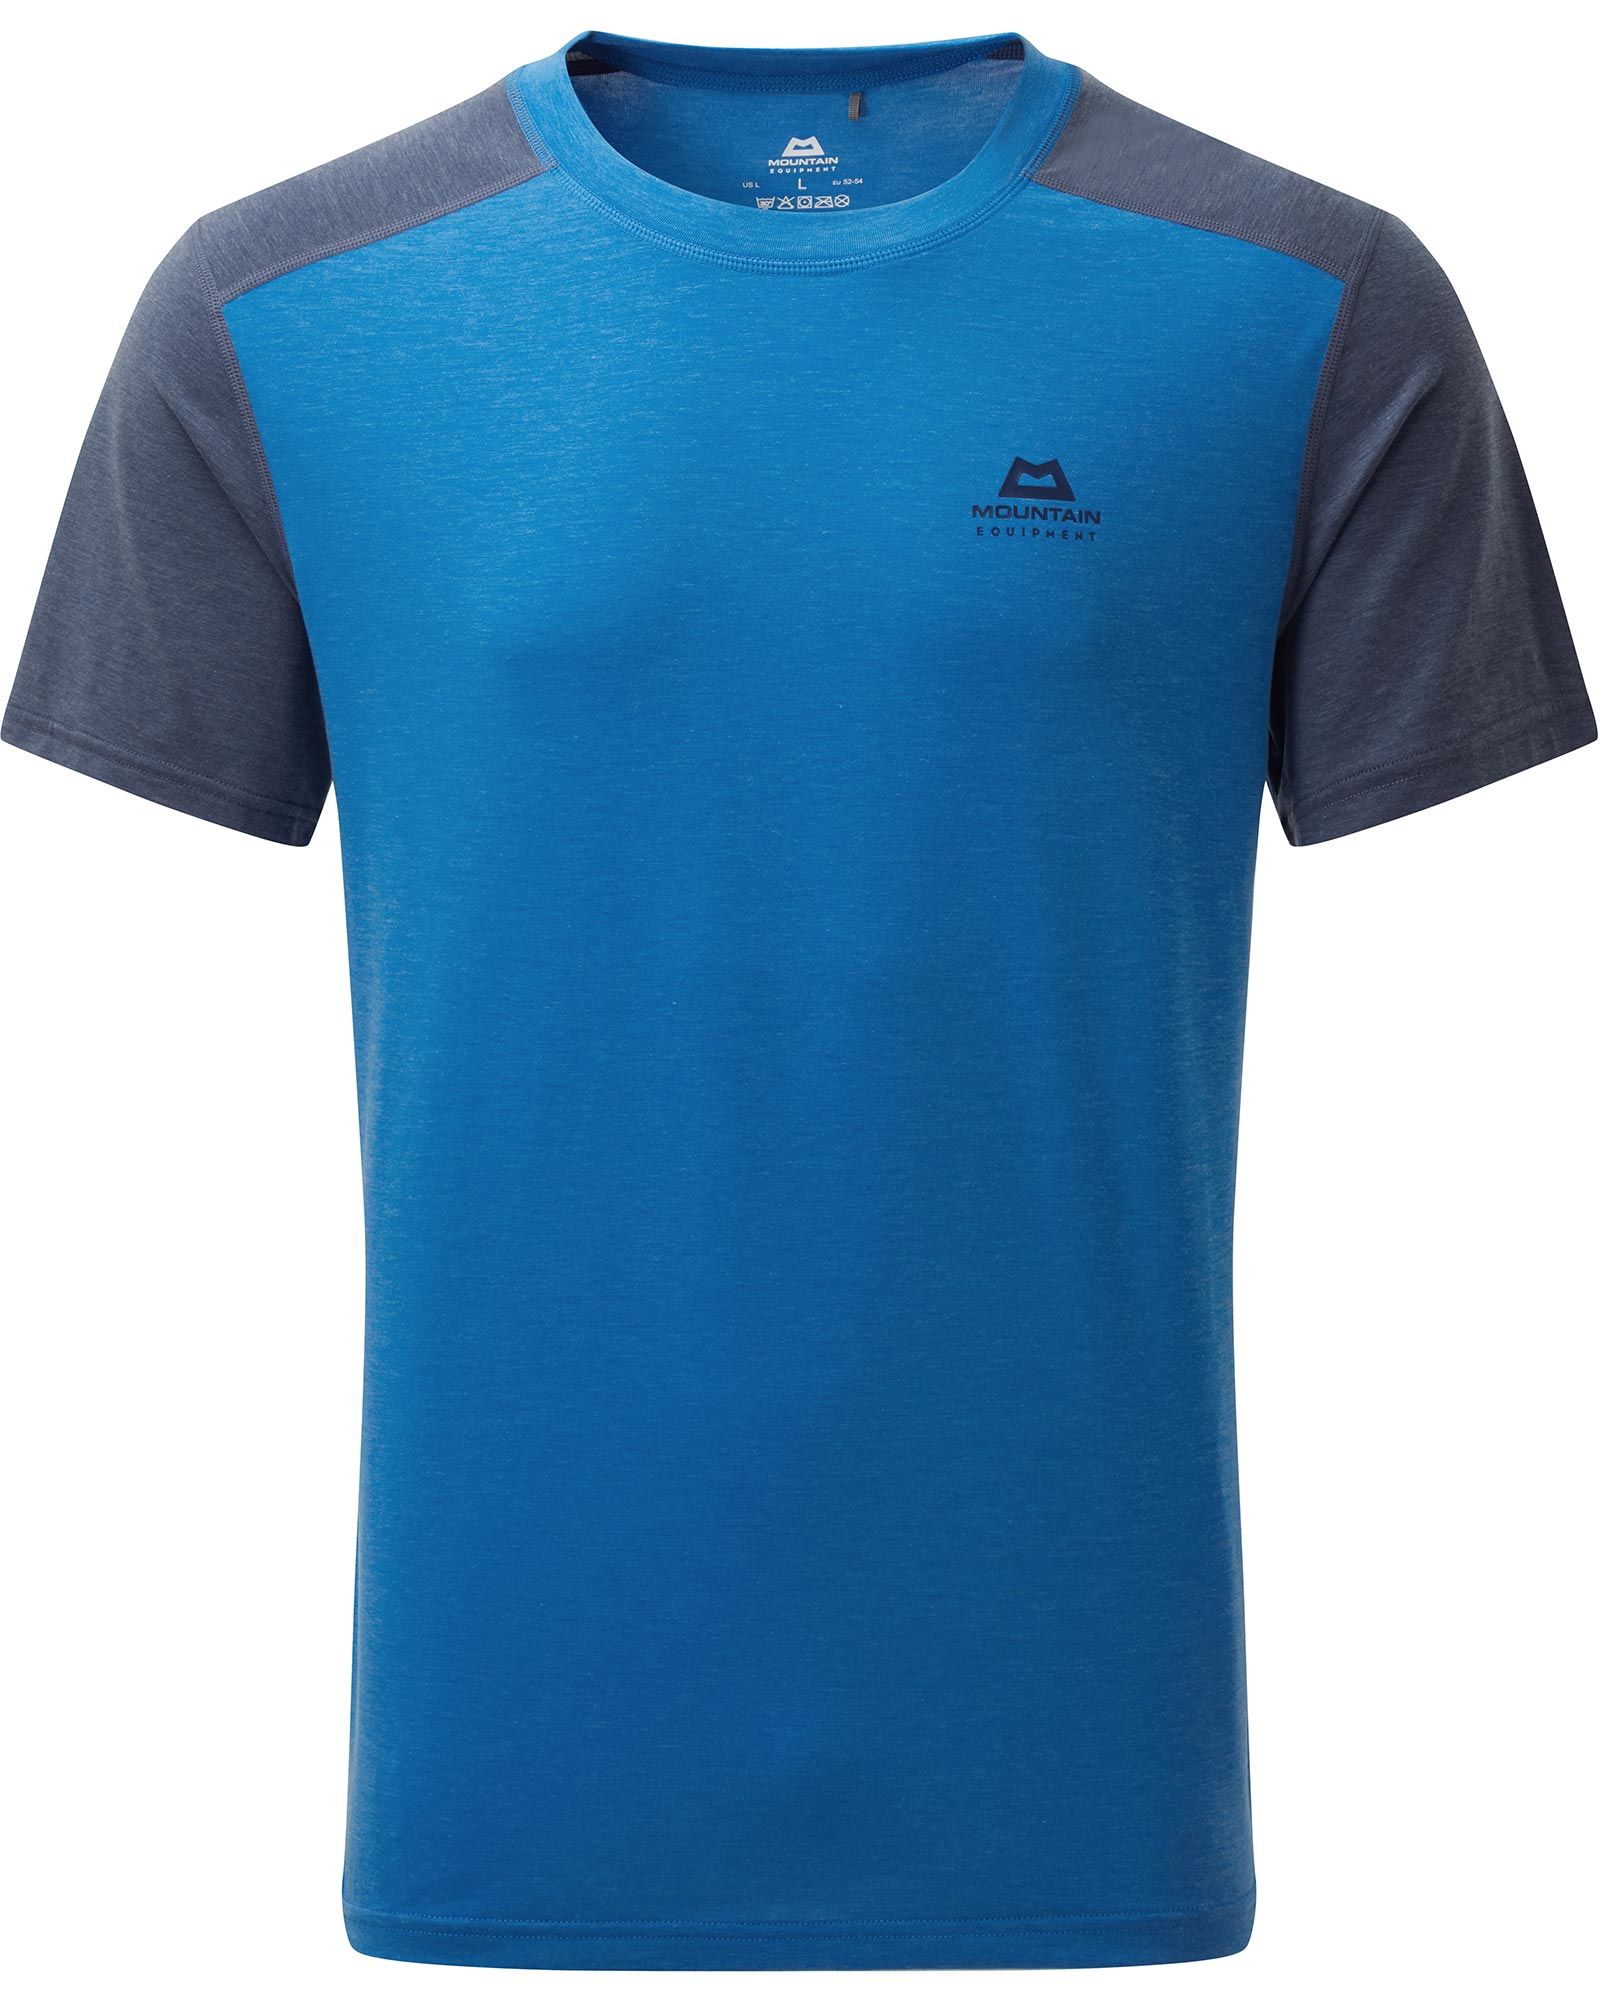 Product image of Mountain equipment Headpoint Block Men's T-Shirt